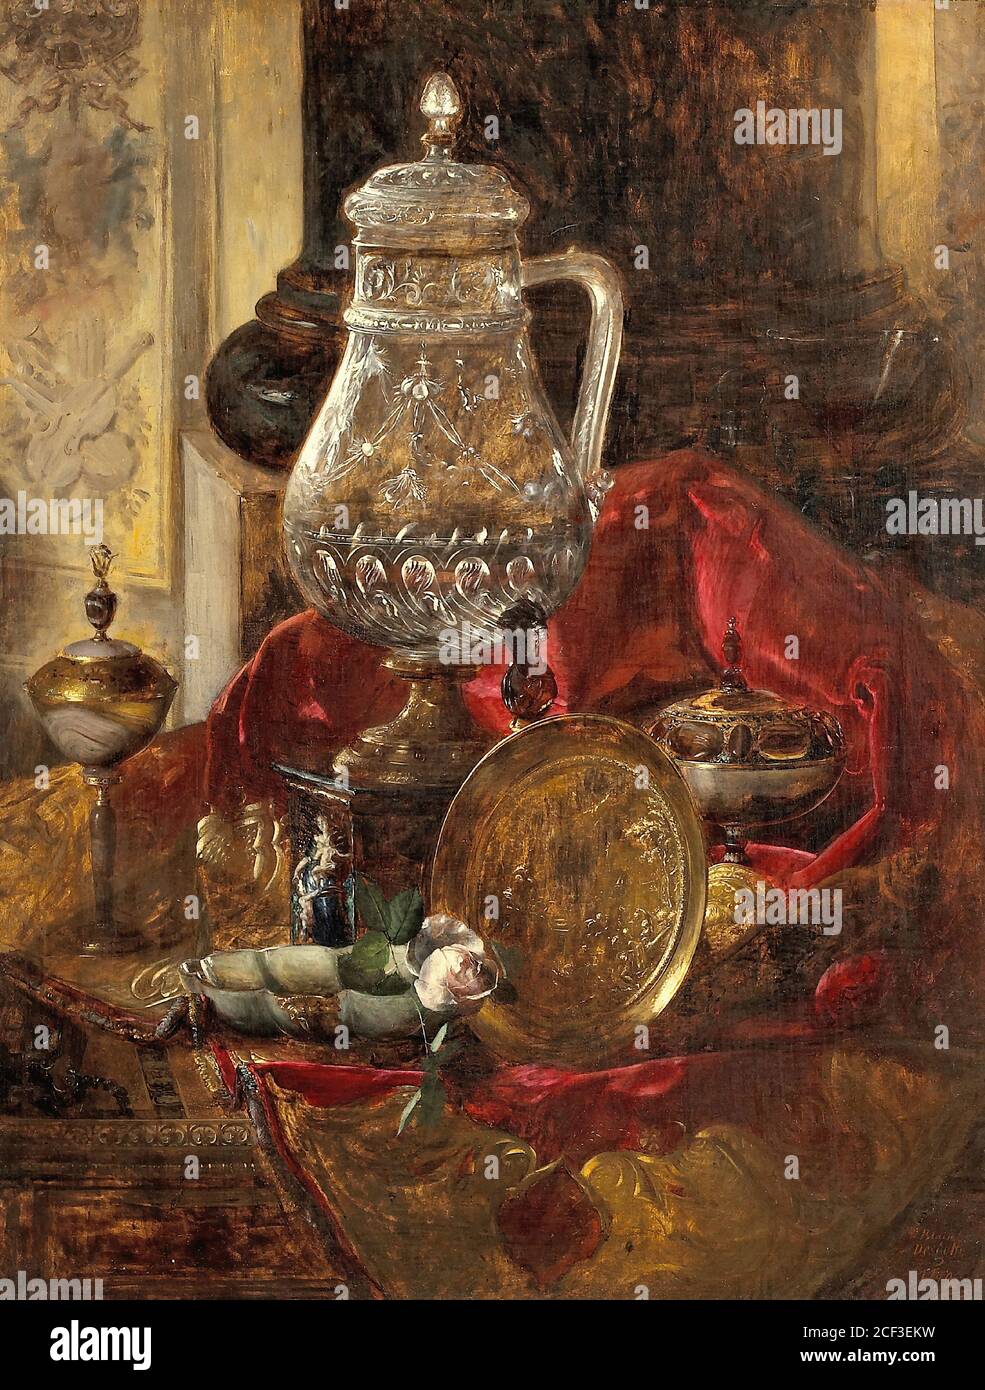 Desgoffe Blaise Alexandre - a Still Life with a Crystal Tankard and Other Precious Objects Arranged - French School - 19th  Century Stock Photo